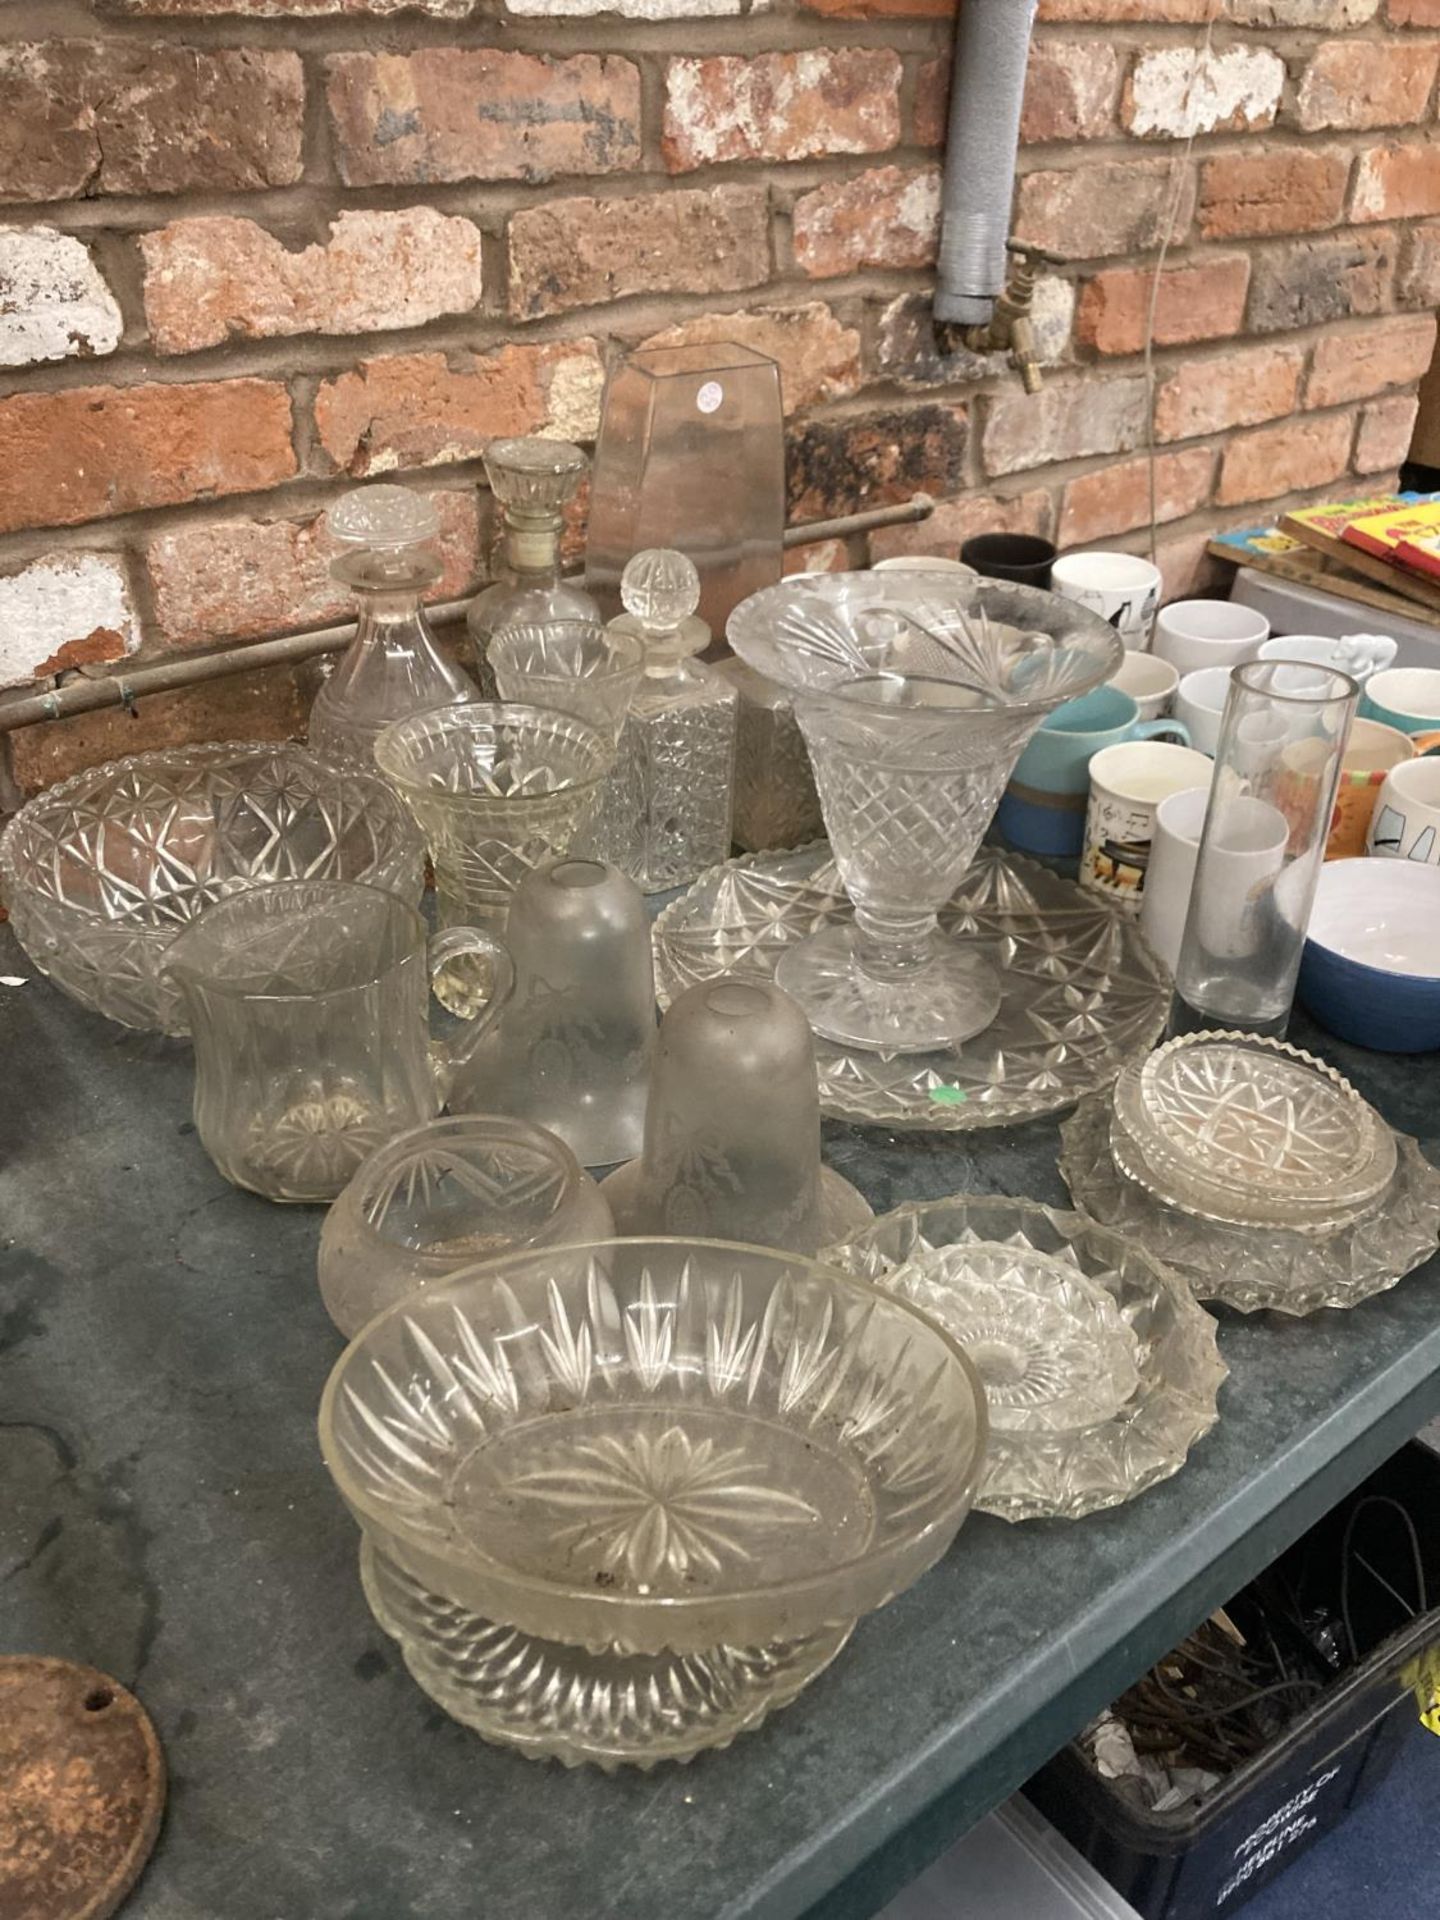 A LARGE QUANTITY OF VINTAGE GLASSWARE TO INCLUDE DECANTERS, VASES, BOWLS, LAMP SHADES, ETC - Image 2 of 4